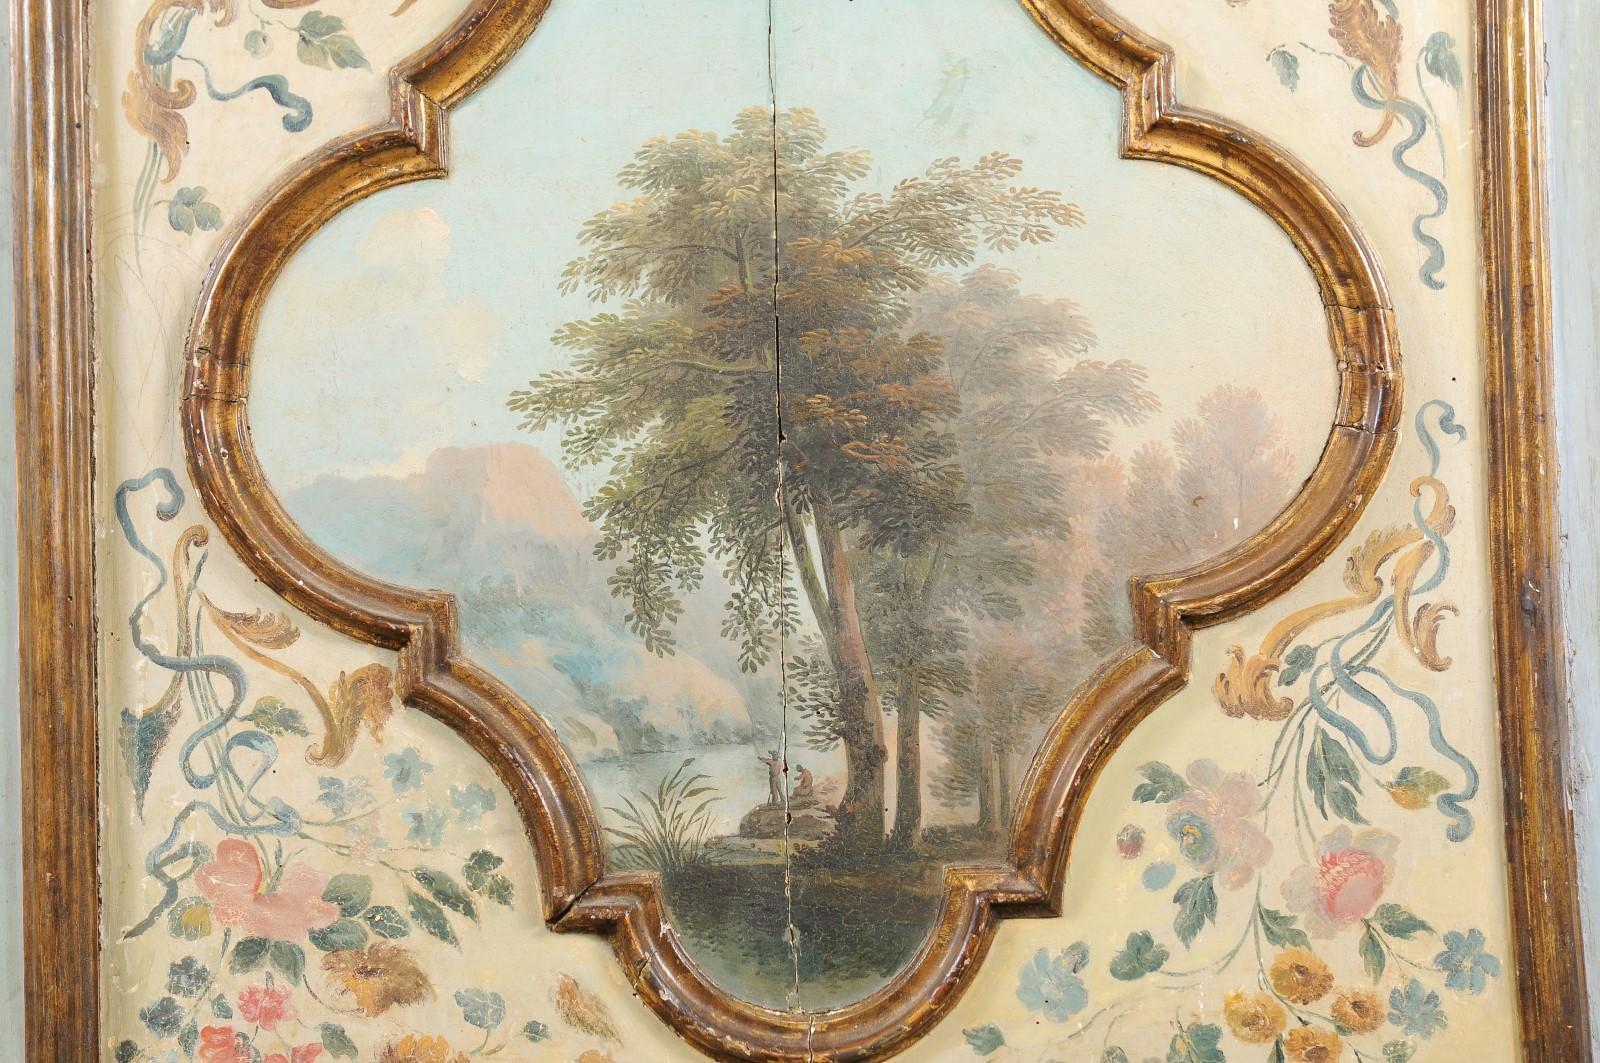 Italian 19th C. Pier Mirror w/ Serene Landscape Oil Painting at Top Panel For Sale 4